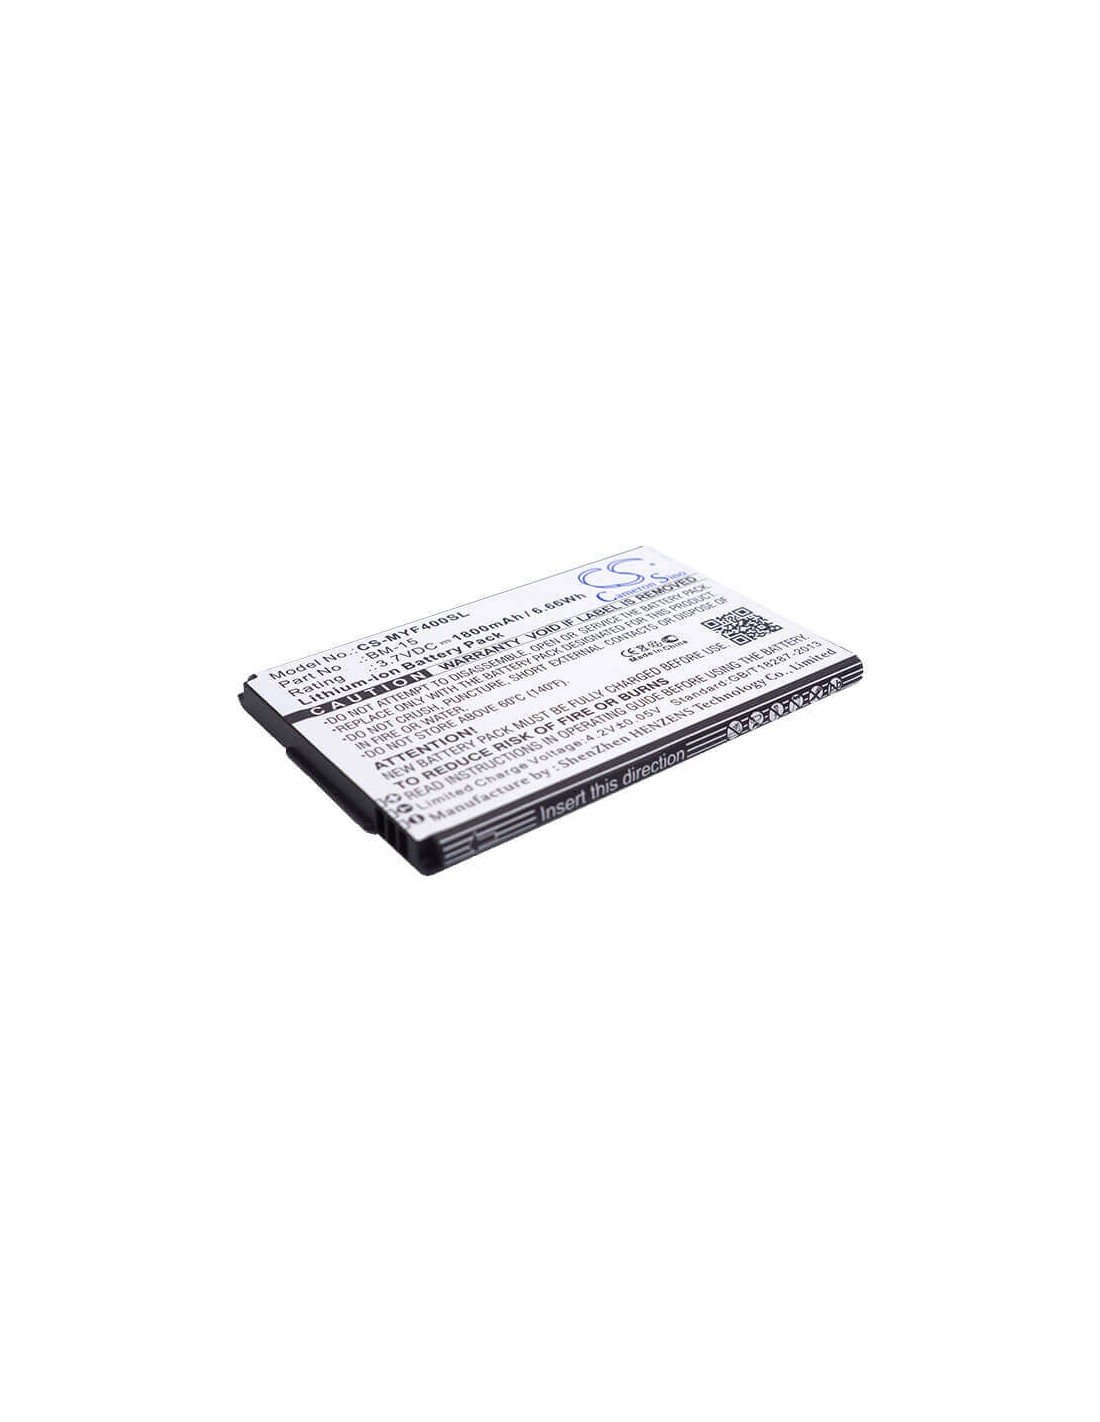 Battery for Myphone Fun4 3.7V, 1800mAh - 6.66Wh